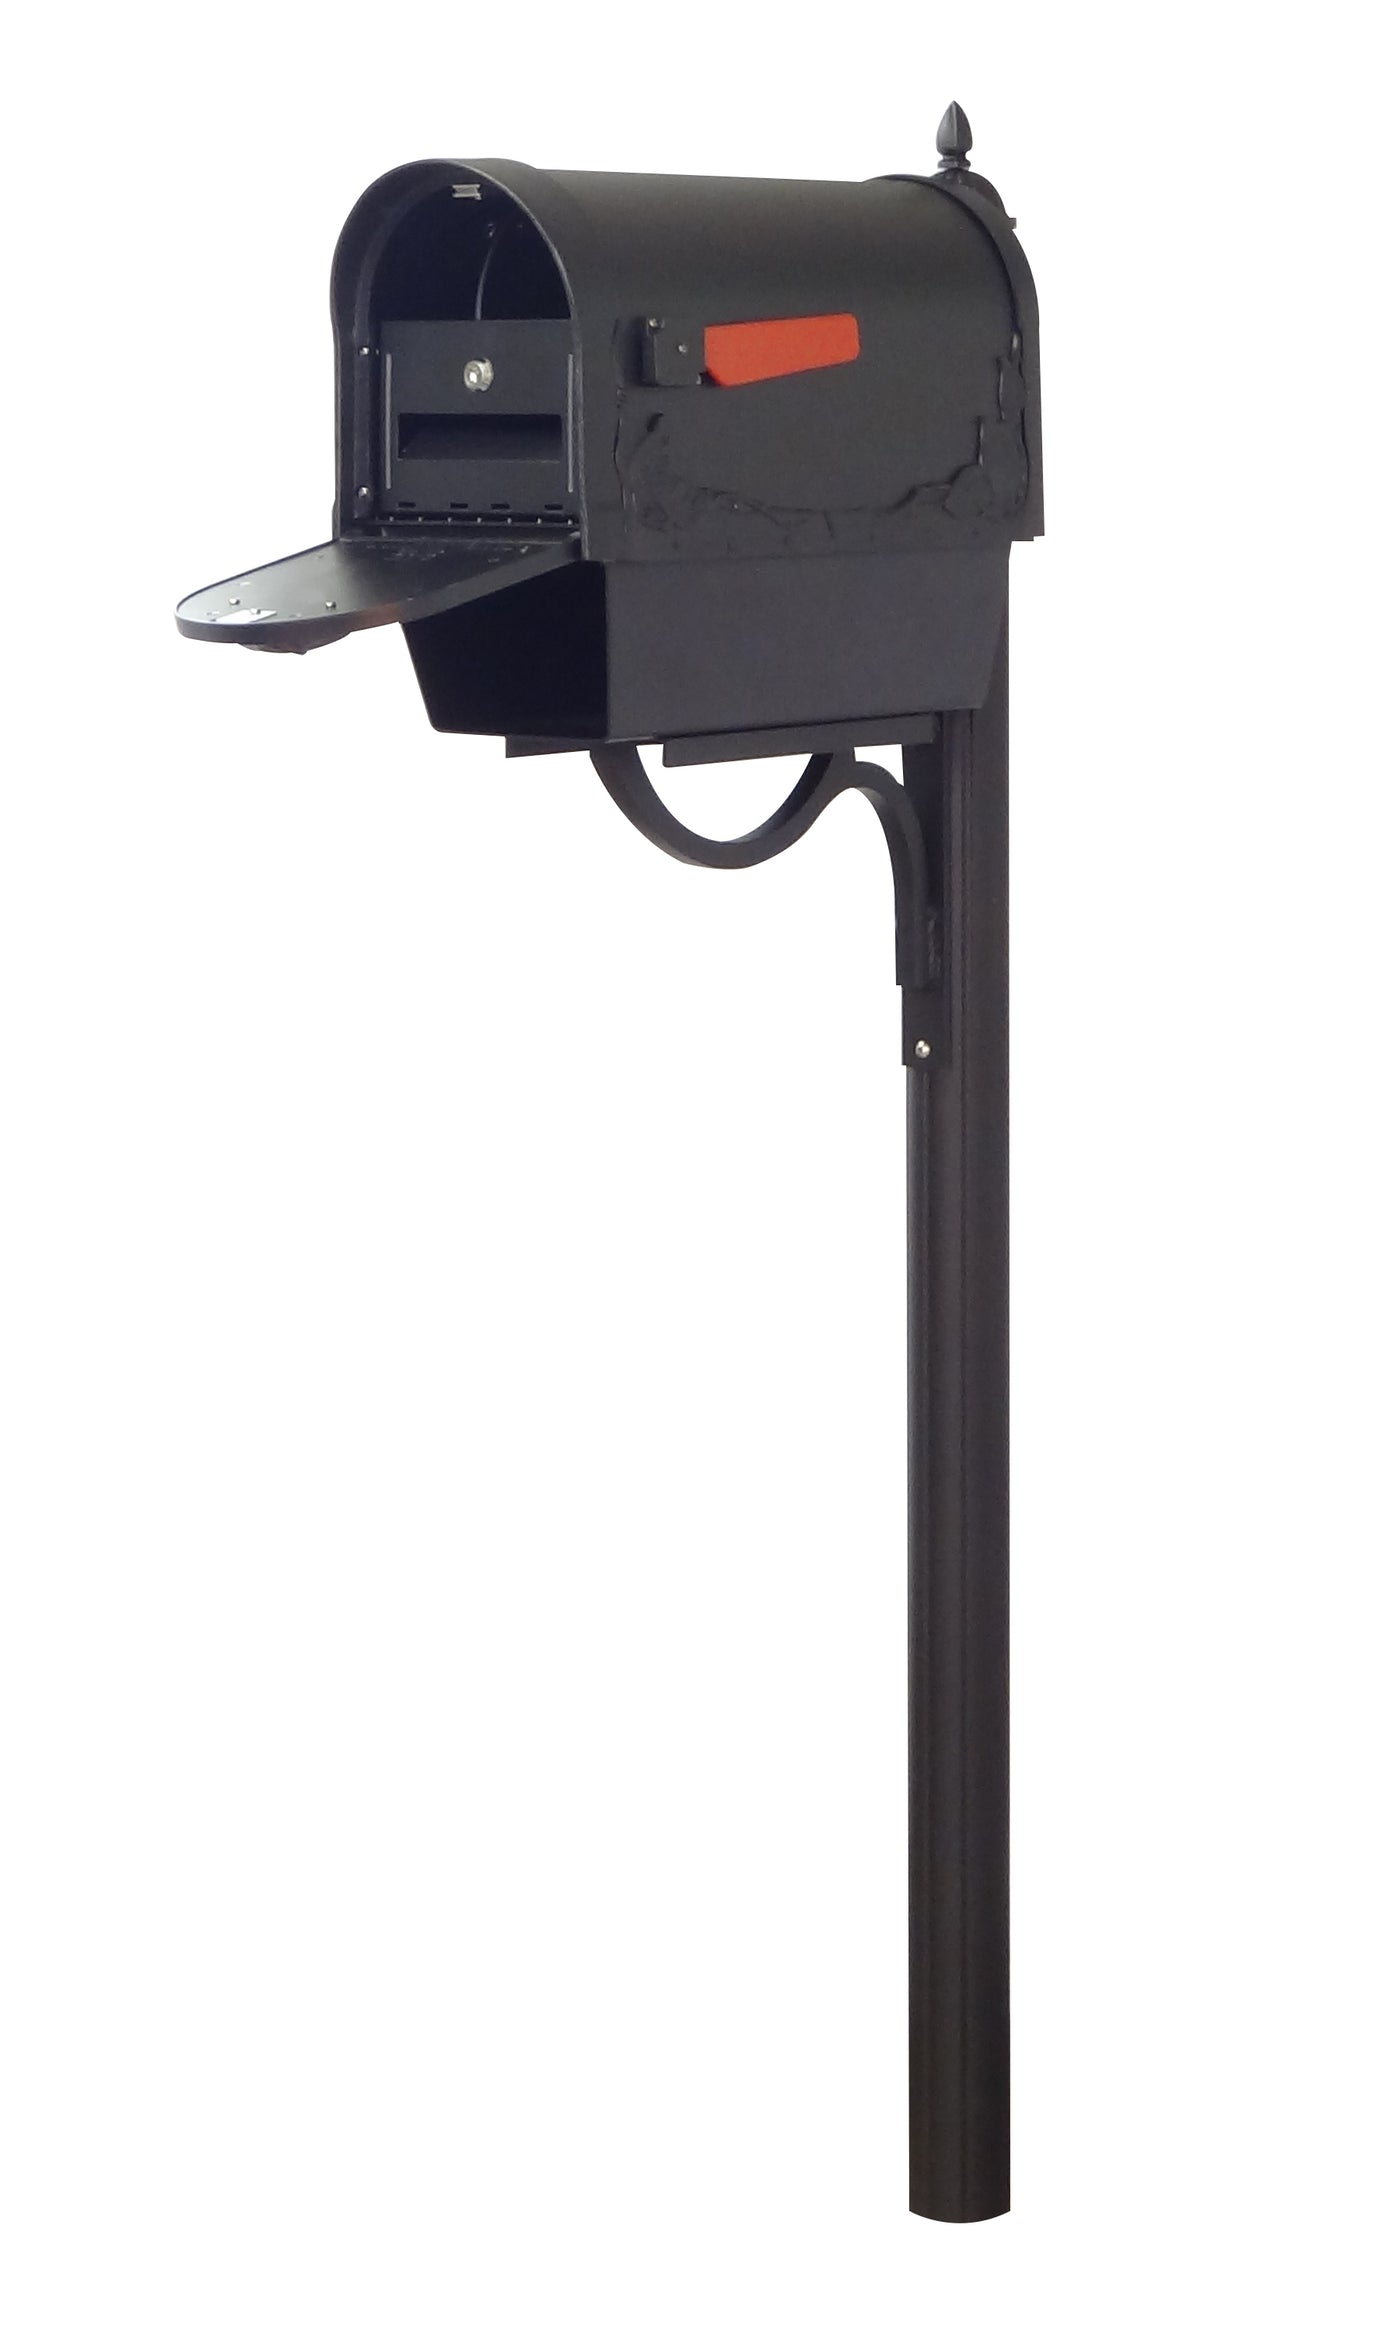 Floral Curbside Mailbox with Newspaper Tube, Locking Insert and Richland Mailbox Post